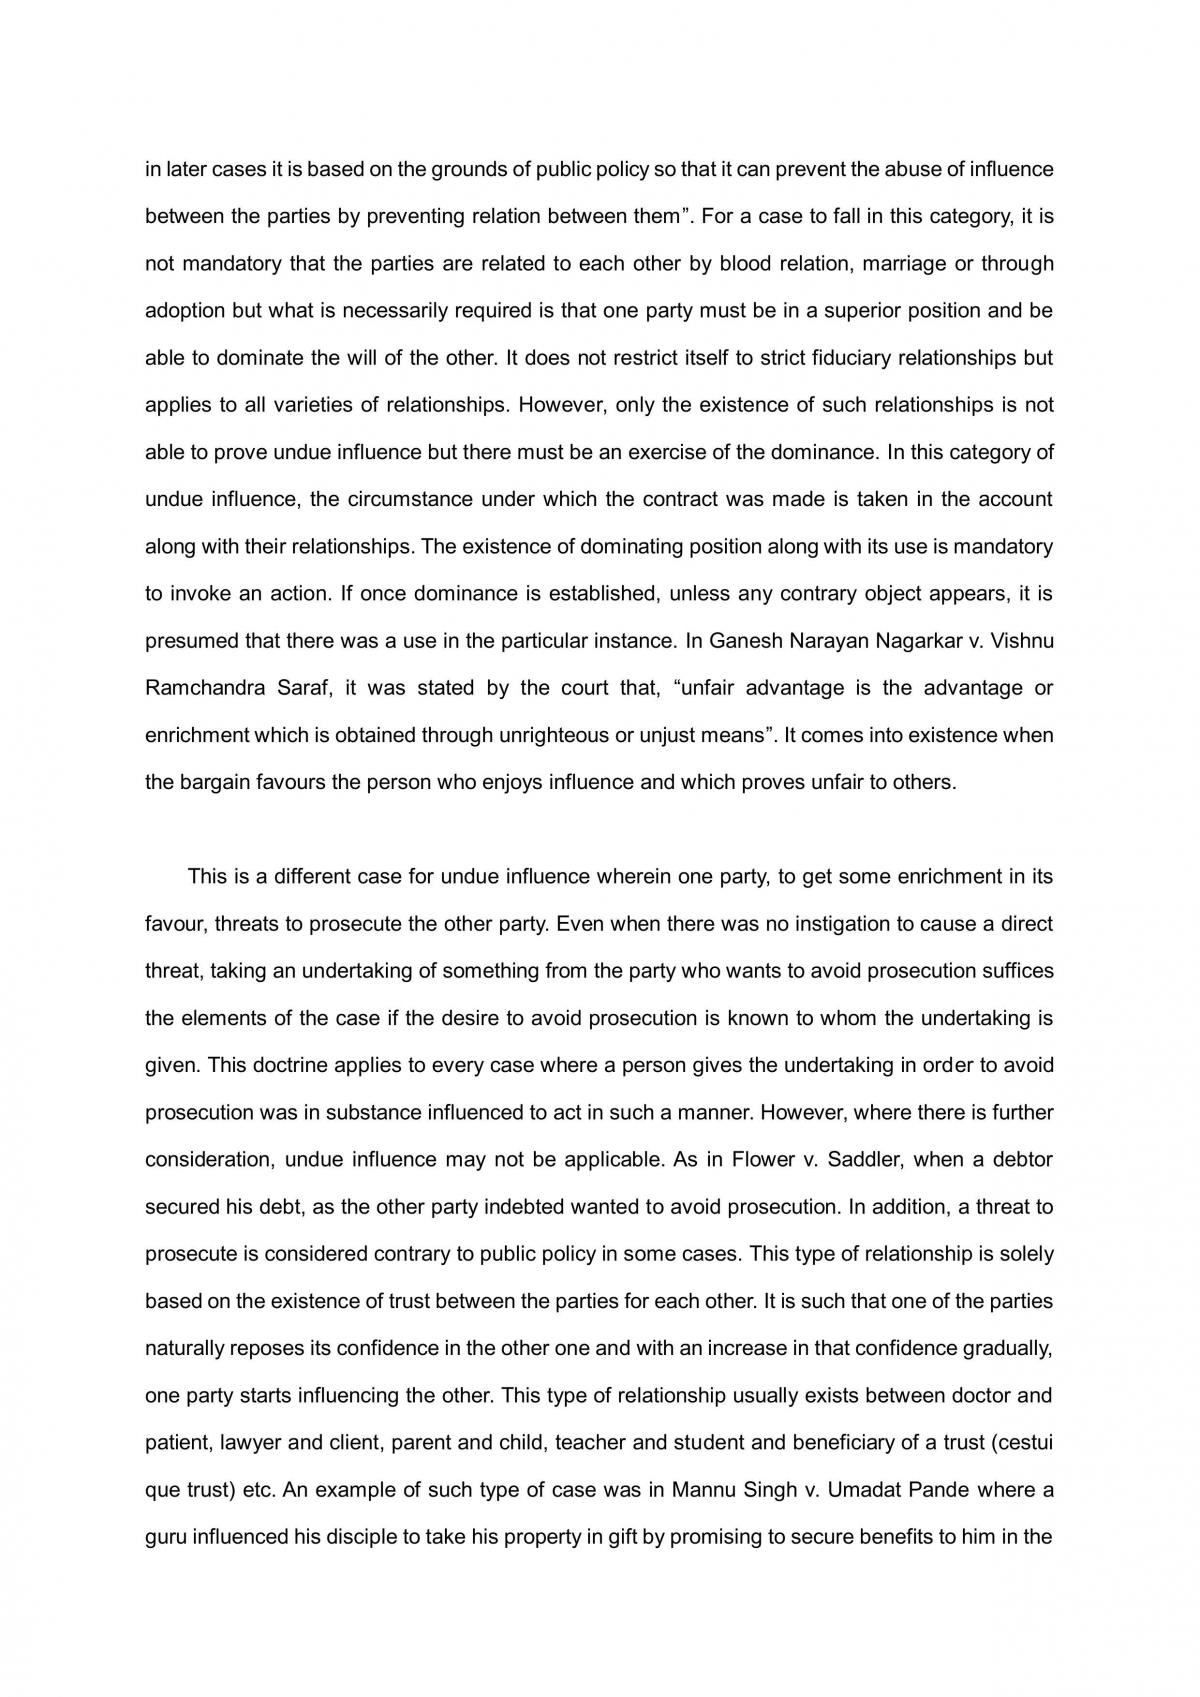 Essay discussing the circumstance where the validity of a contract could be affected and set aside for being void ab initio. te resolution.  - Page 3